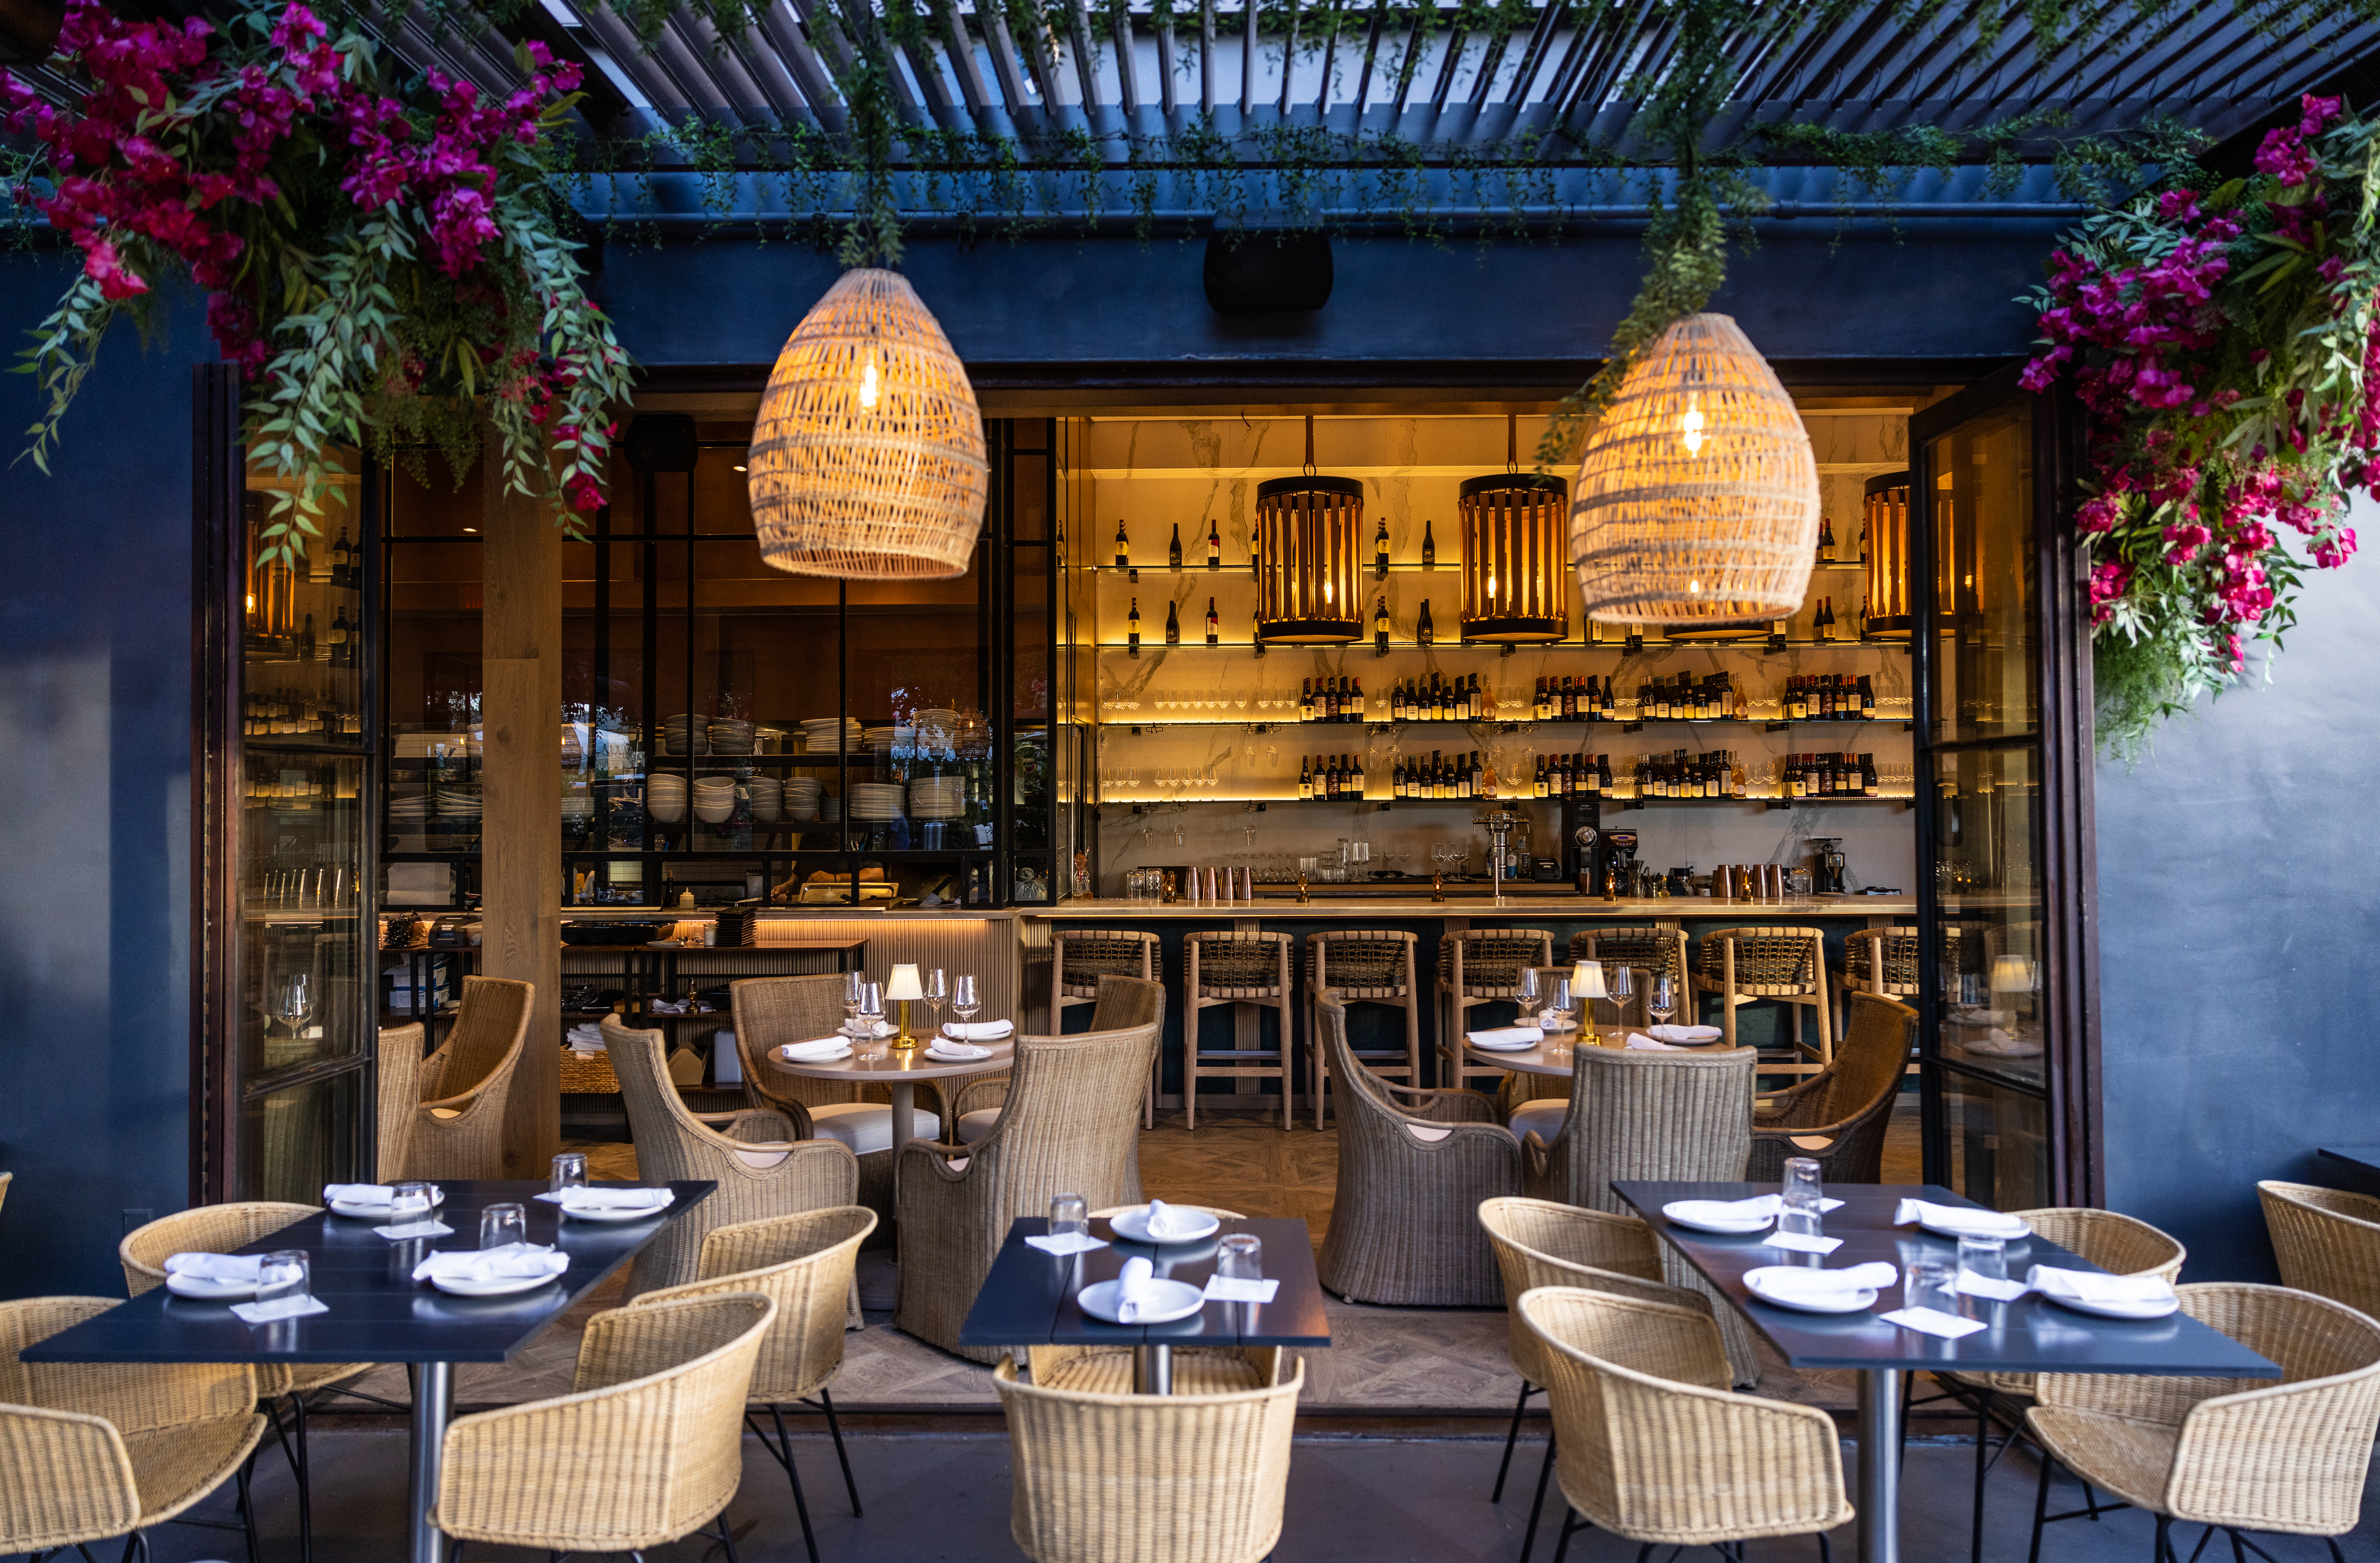 An outdoor and indoor dining area at Paloma restaurant in Venice, California.